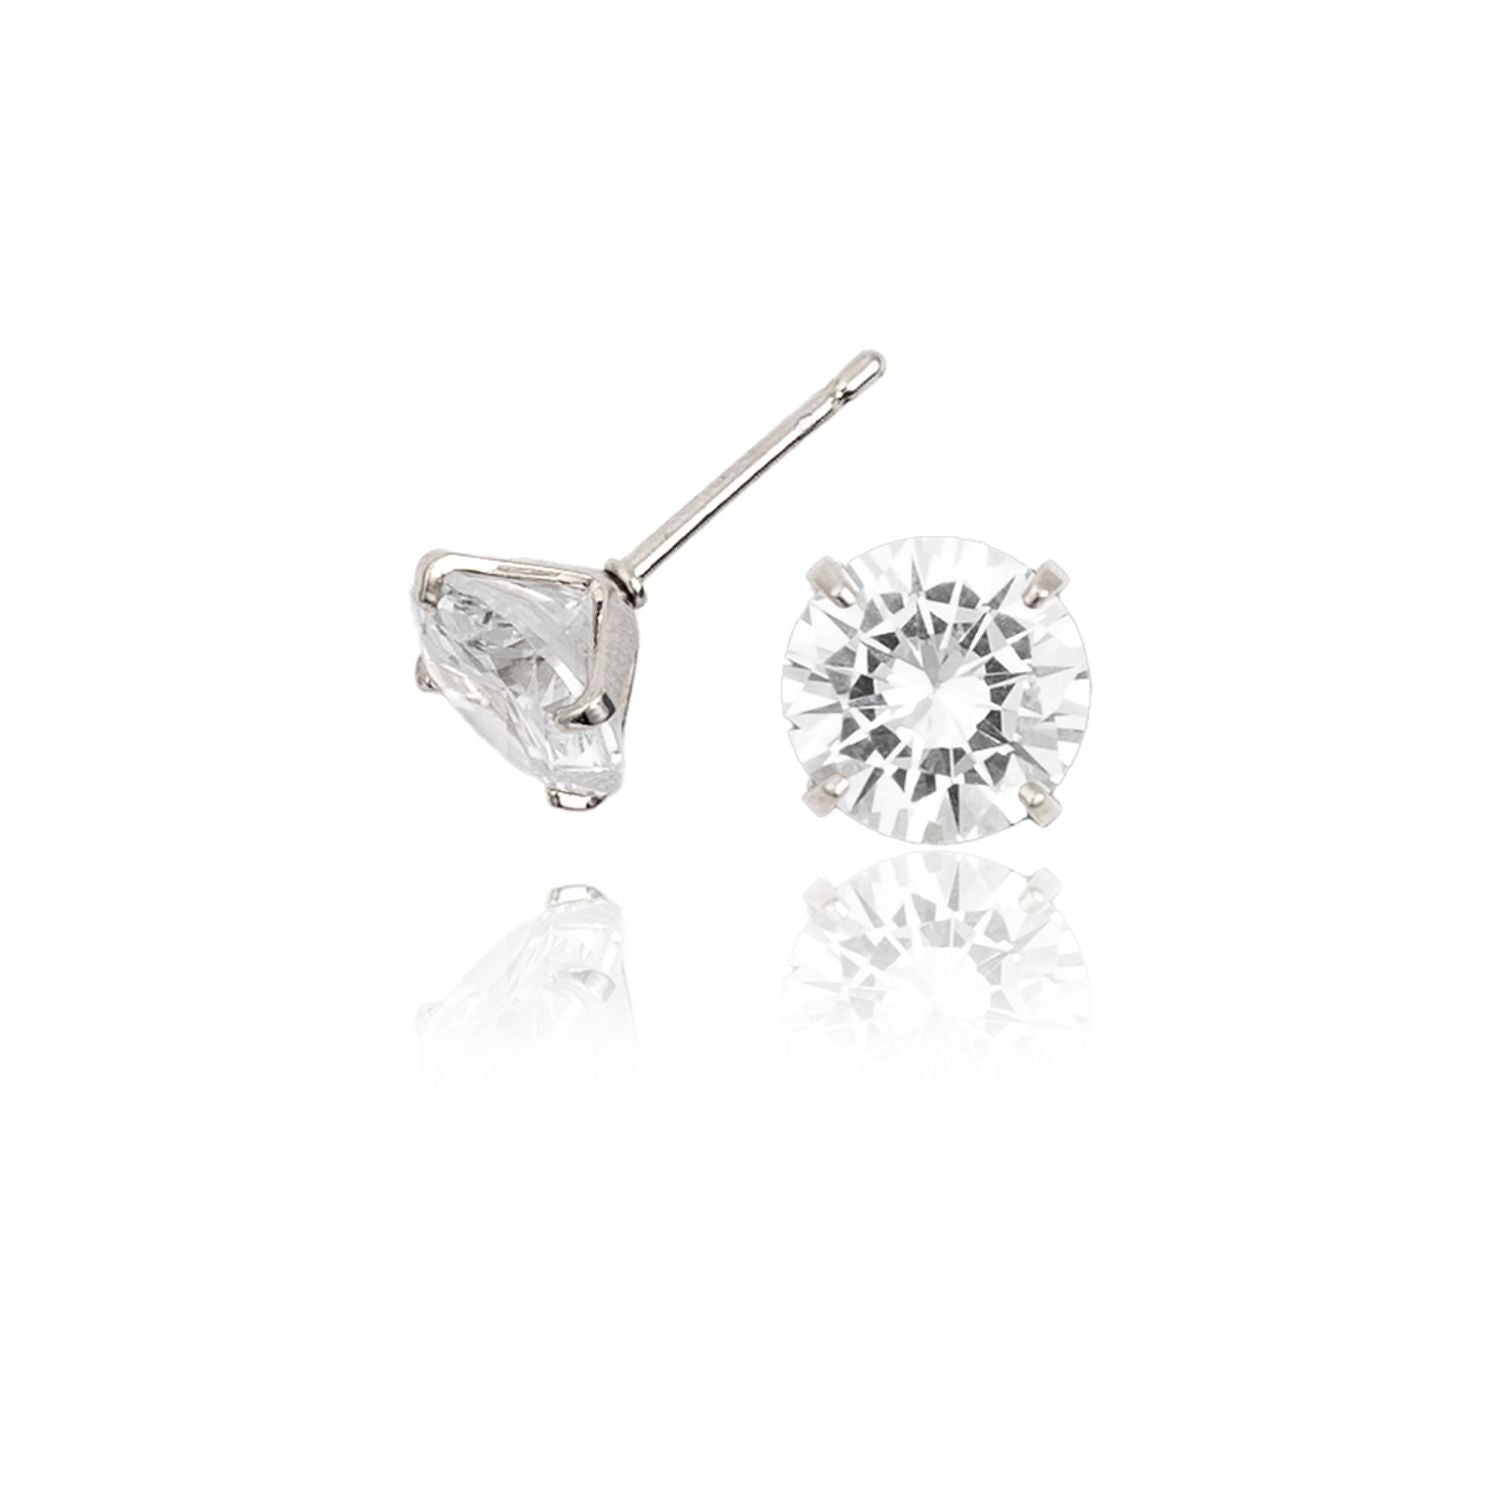 8mm Clear Round CZ Cubic Zirconia Stone Stud Earrings (L136)